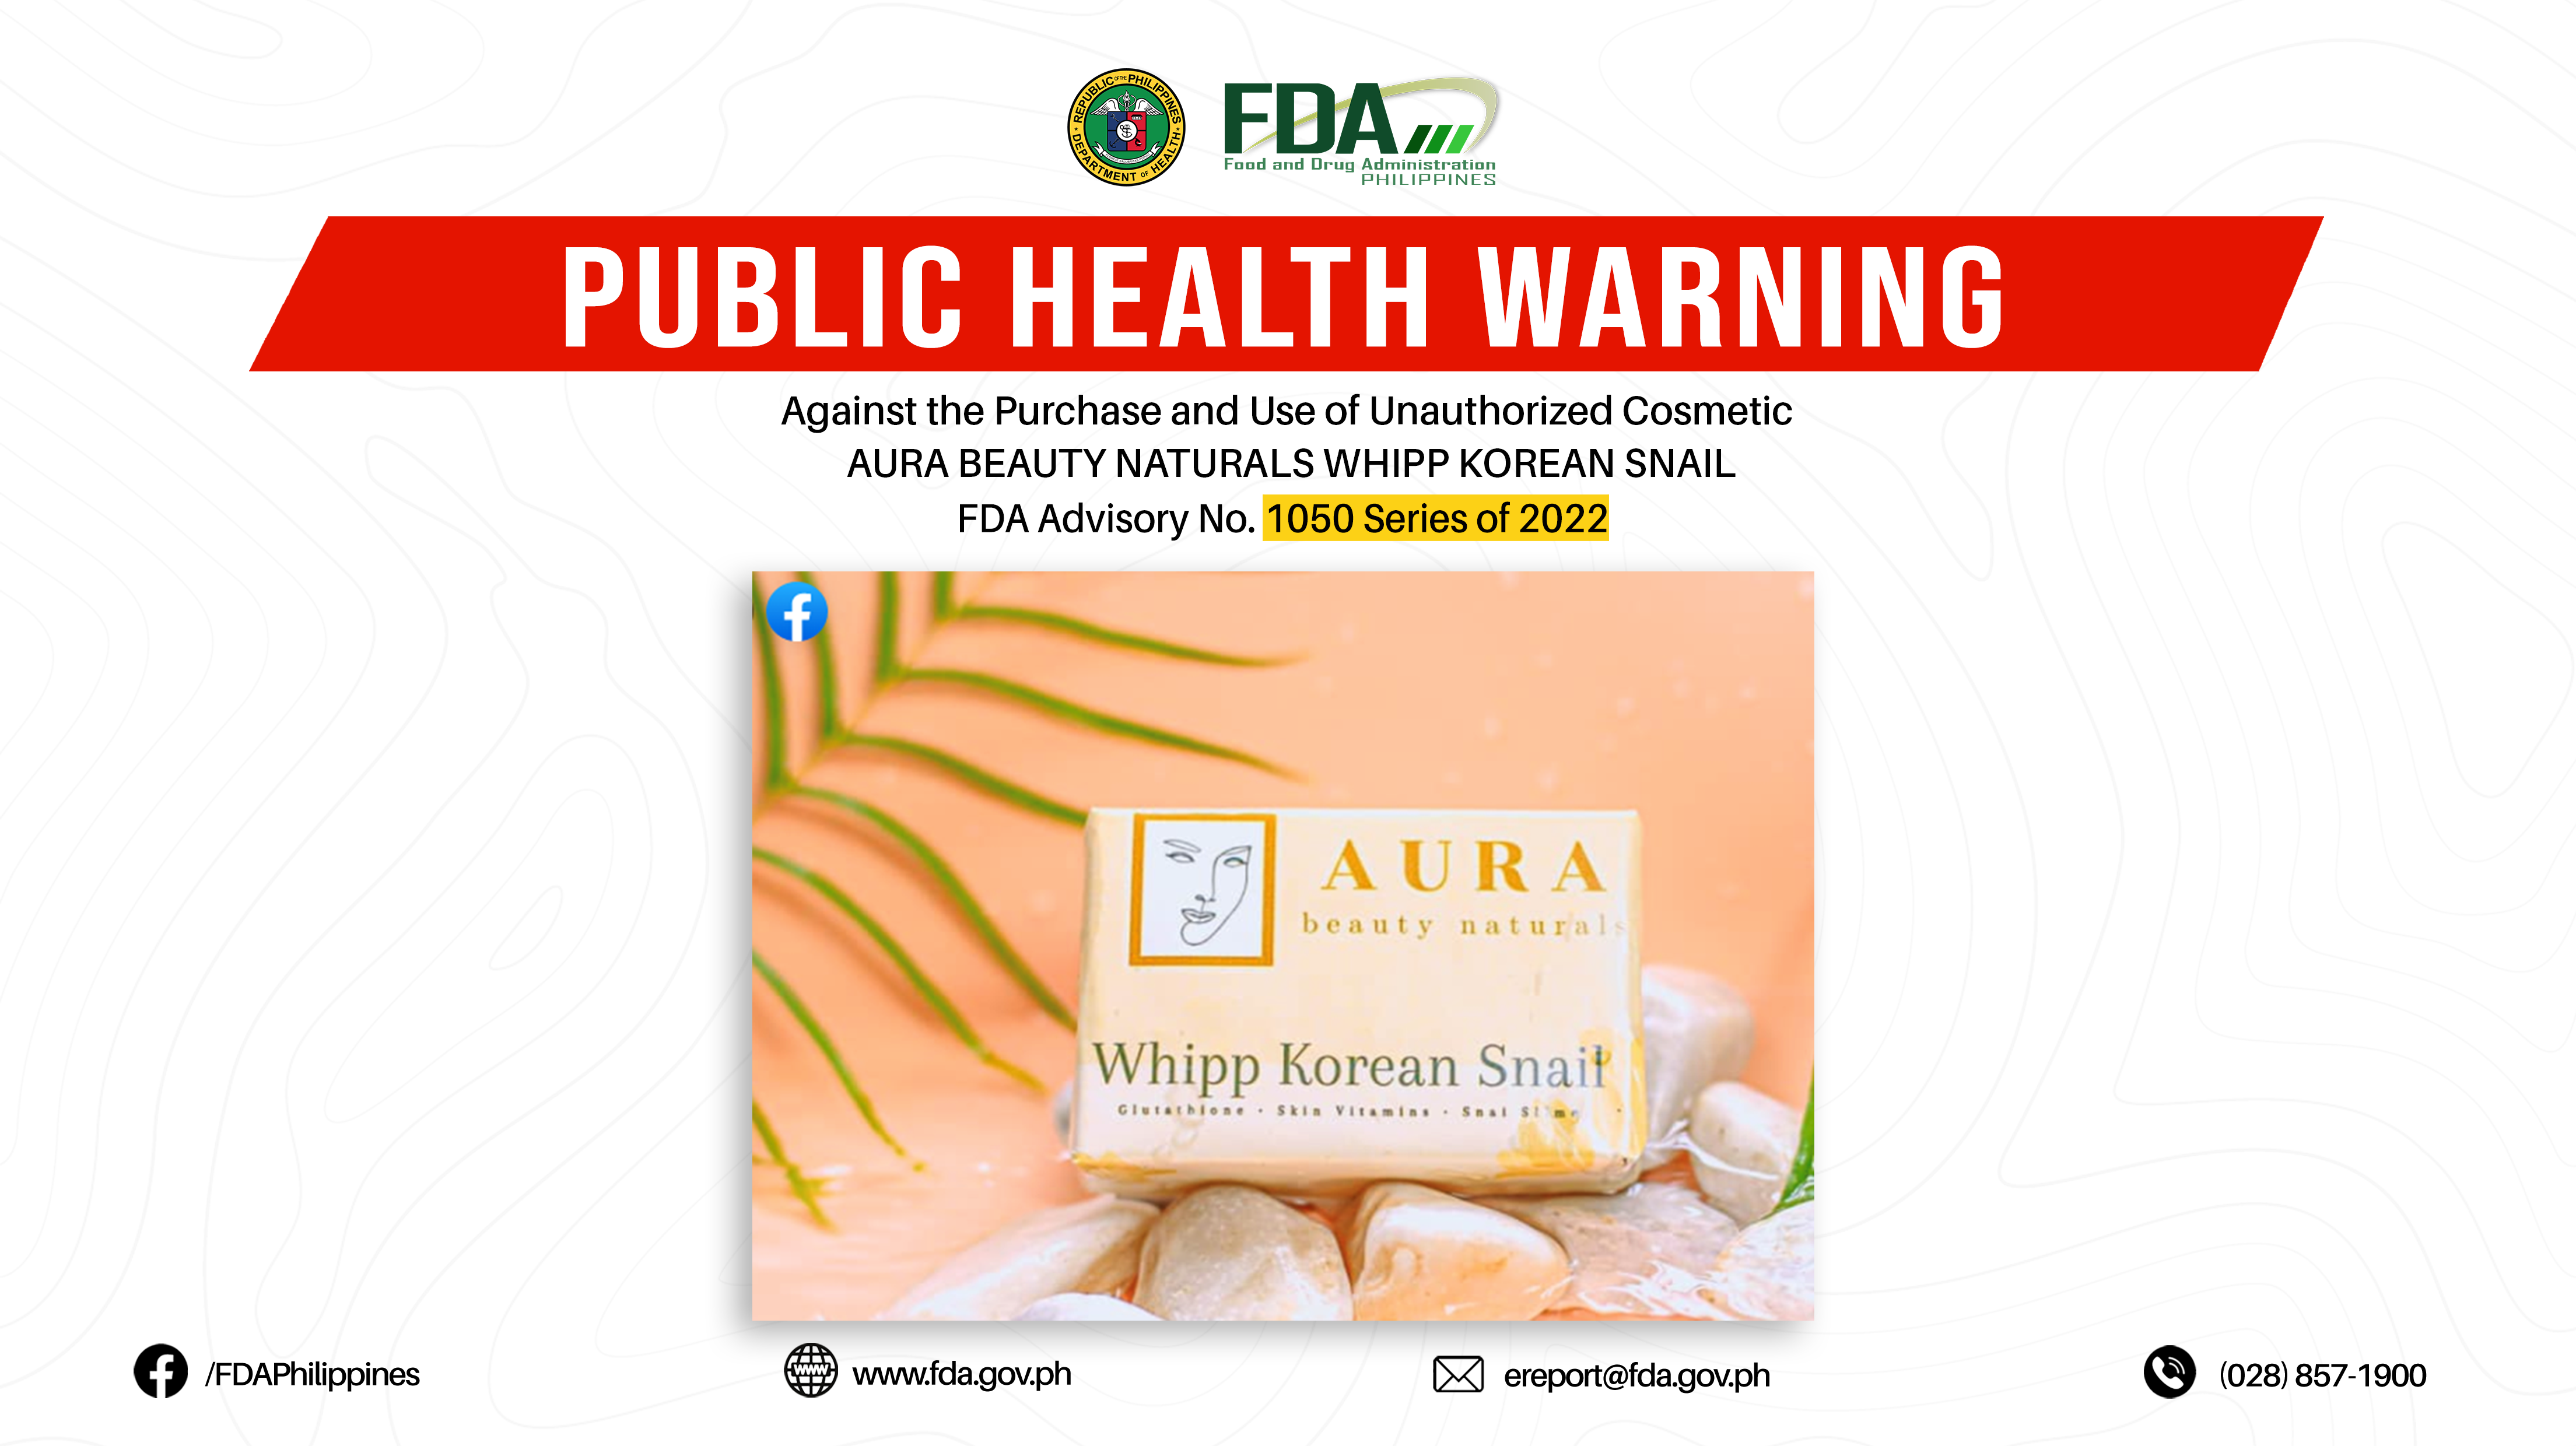 FDA Advisory No.2022-1050 || Public Health Warning Against the Purchase and Use of Unauthorized Cosmetic AURA BEAUTY NATURALS WHIPP KOREAN SNAIL